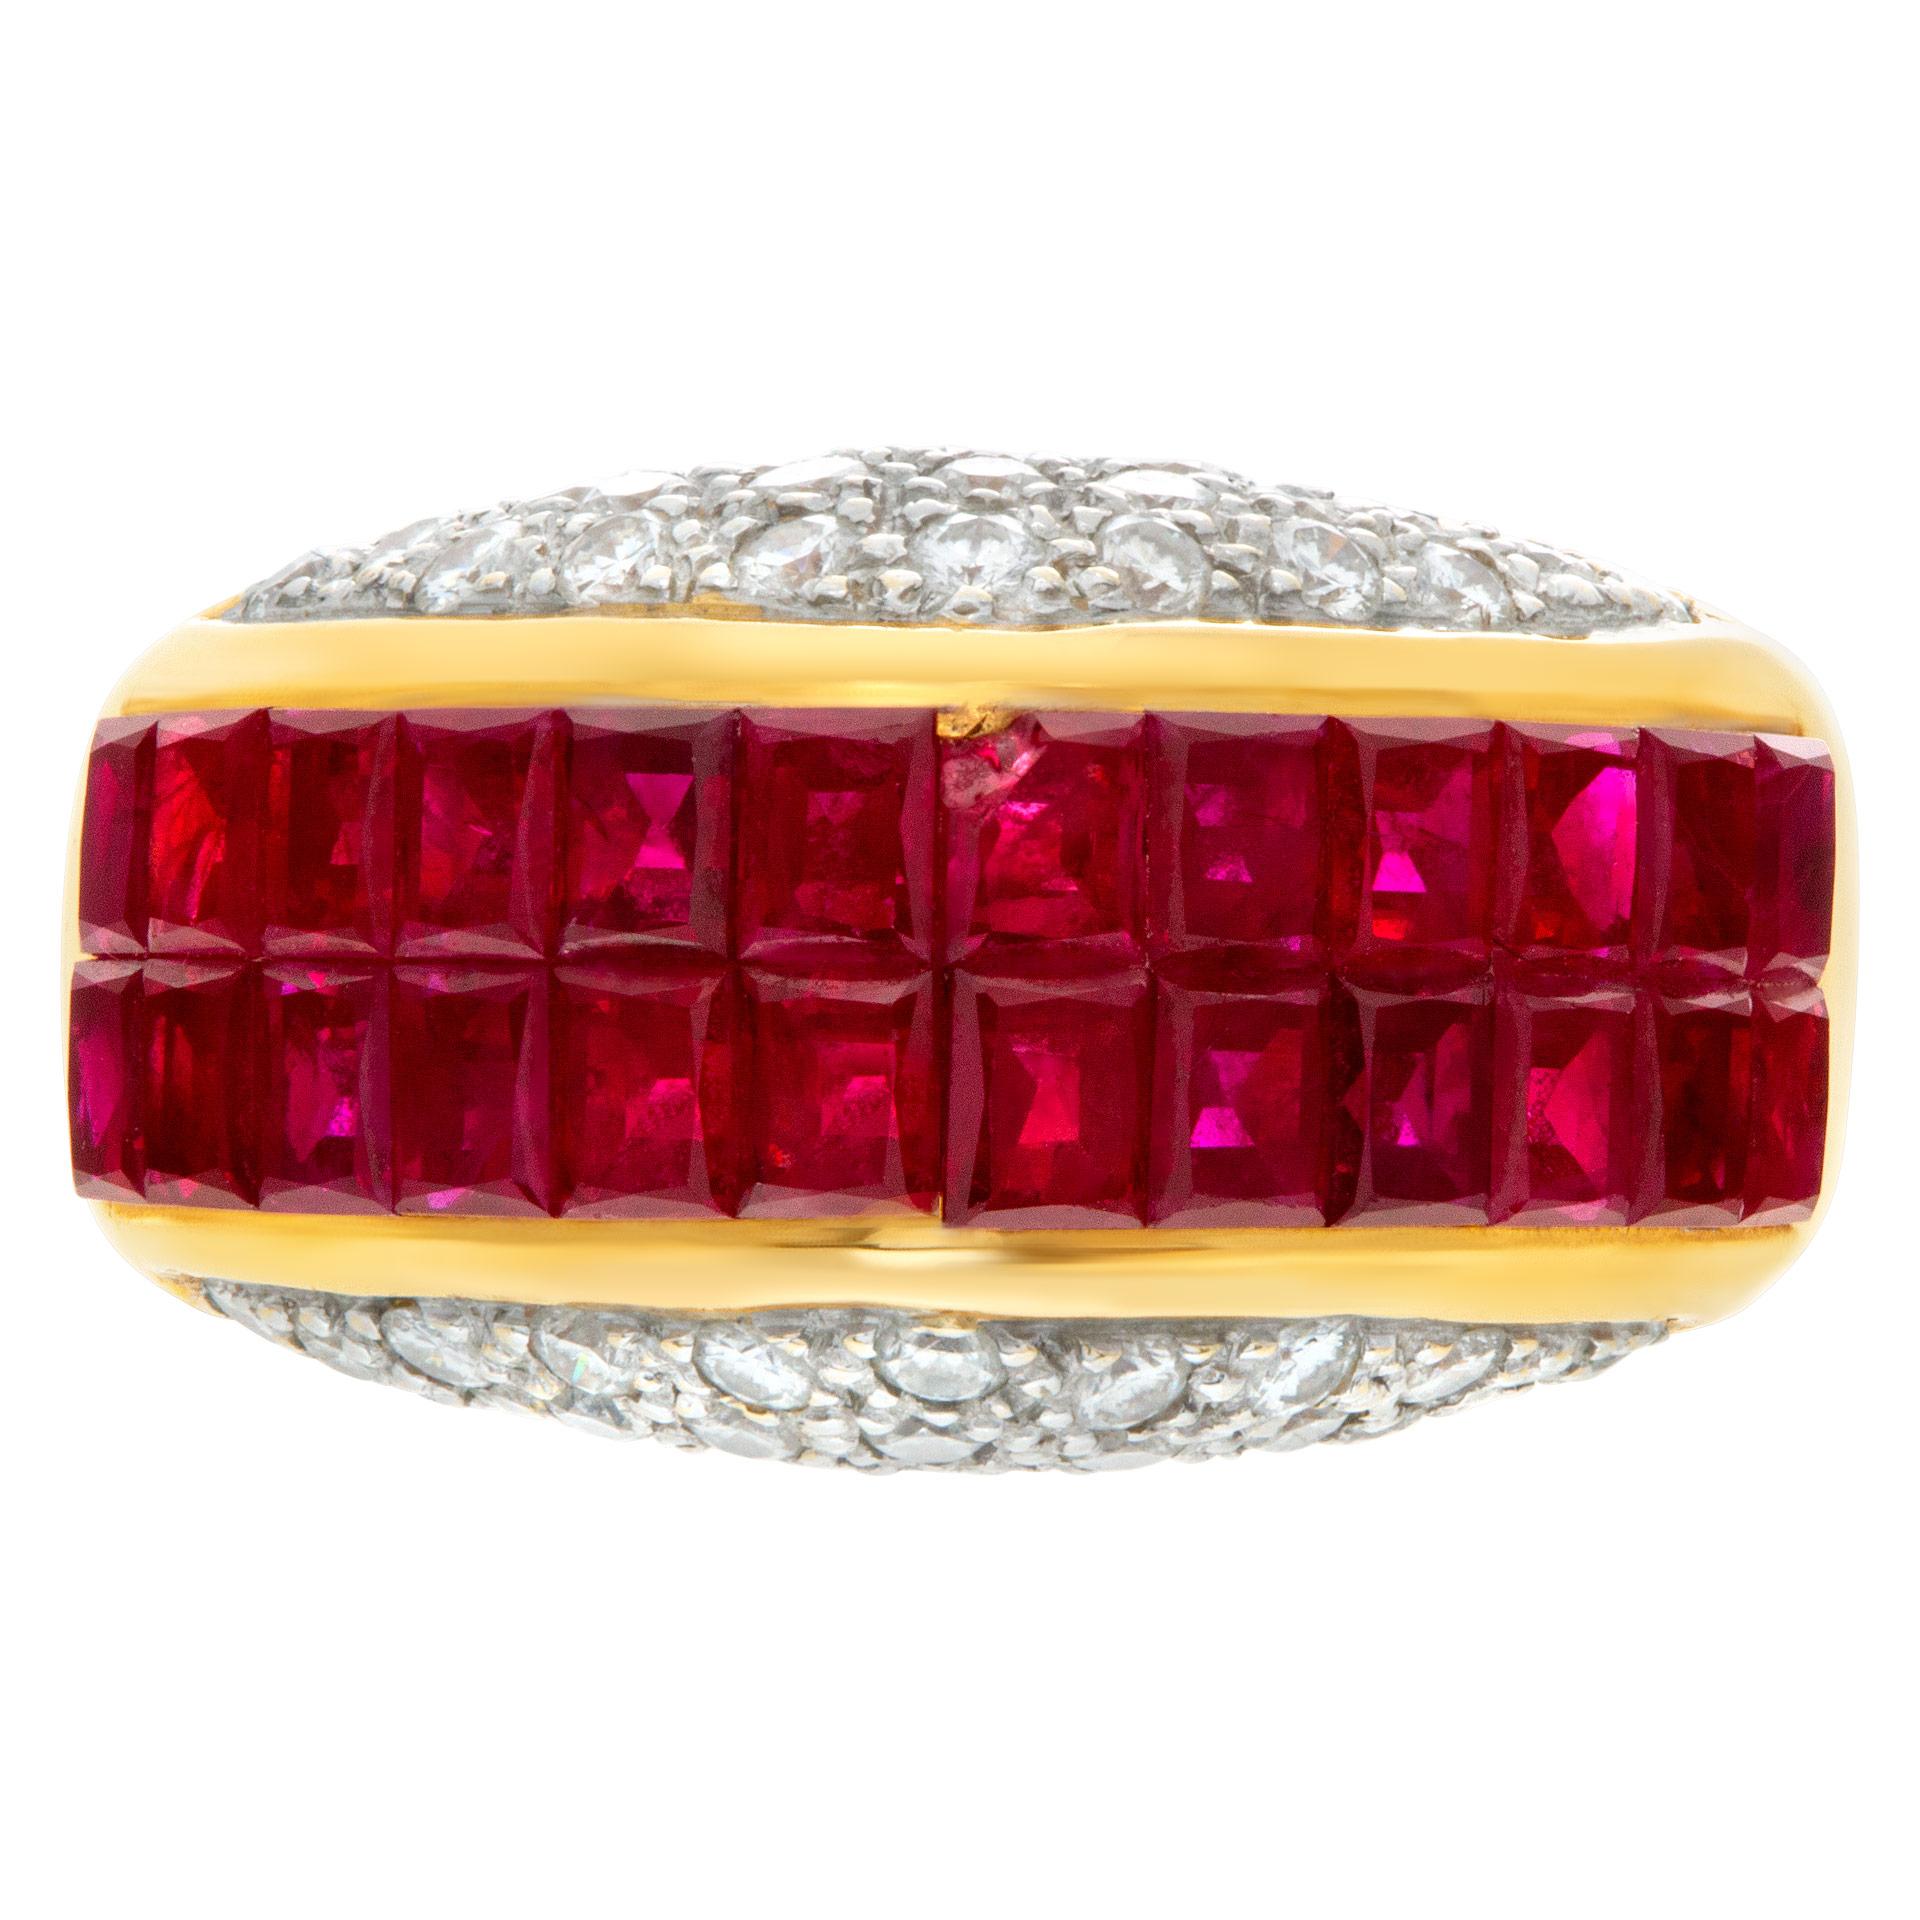 Ruby and diamond ring in 18k yellow gold with over 2.40 carats in rubies and 1 carat in diamonds. Size 7.5This Diamond/Ruby ring is currently size 7.5 and some items can be sized up or down, please ask! It weighs 6.3 pennyweights and is 18k.
